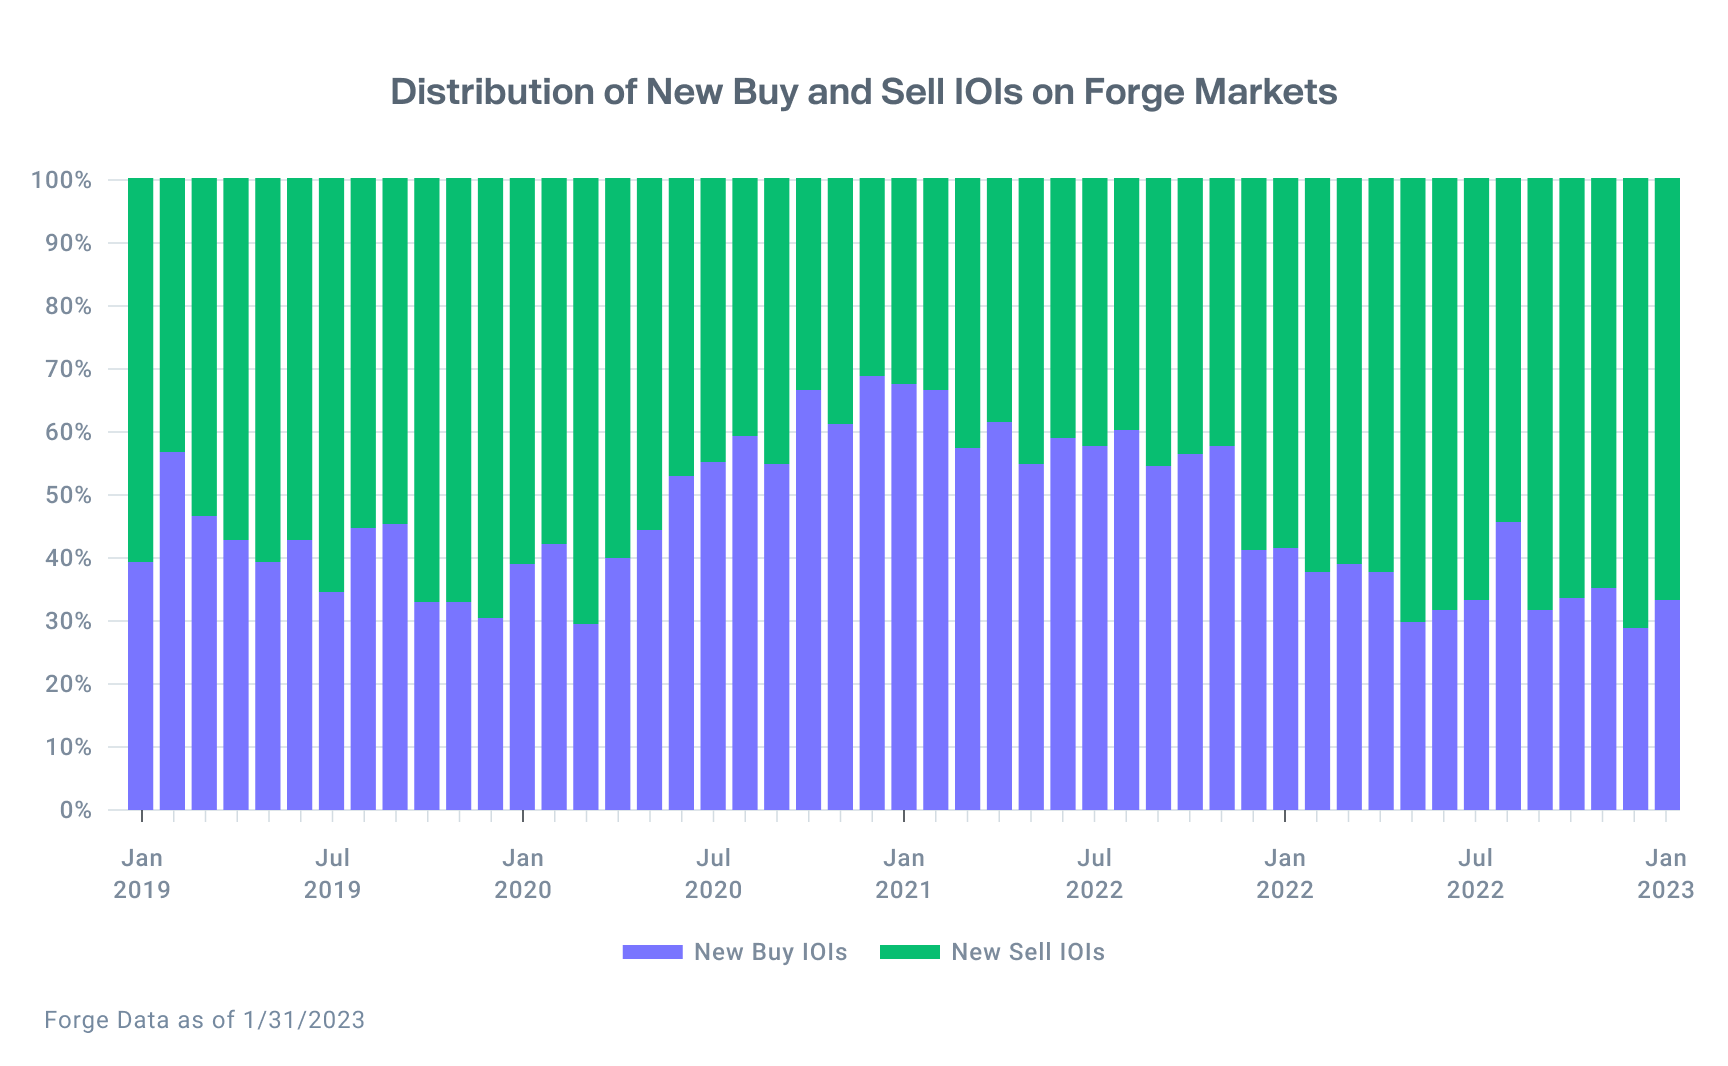 Chart shows an unchanged distribution of new Buy and Sell IOI for January 2023